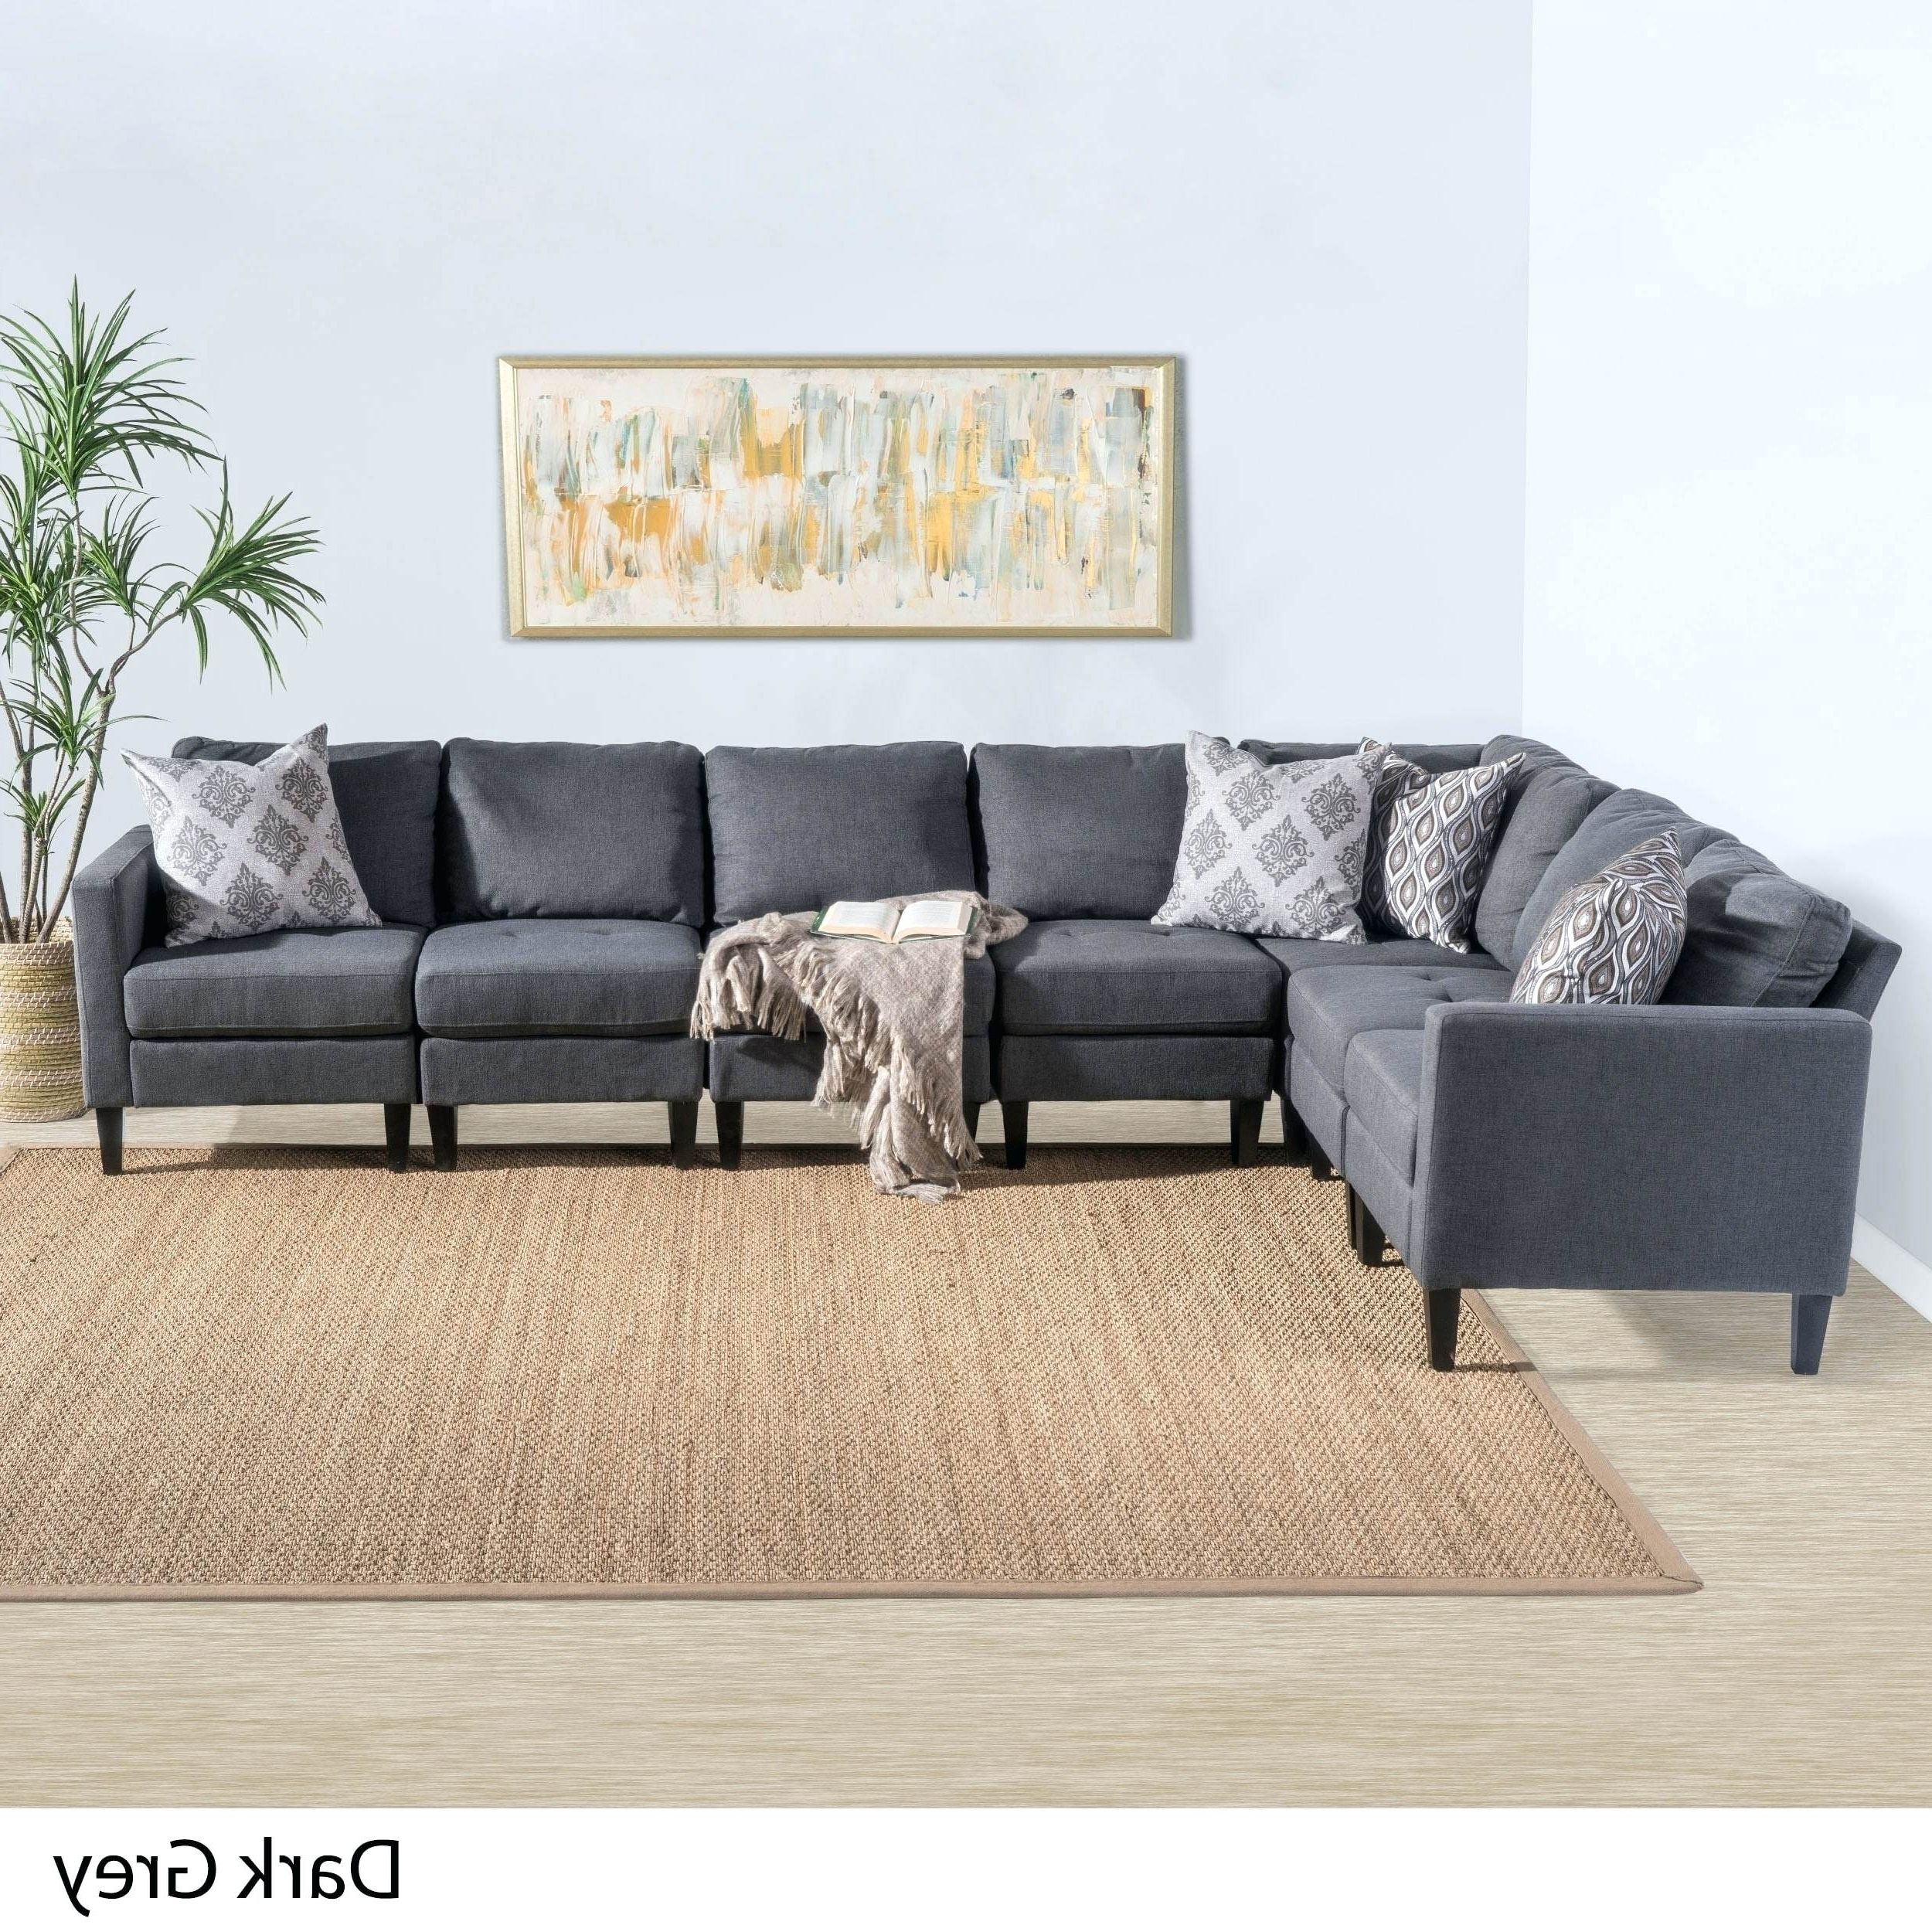 Big Lots Chaises With Popular Fabric Sectional Sofas With Recliners For Sale Chaise Small Spaces (View 2 of 15)